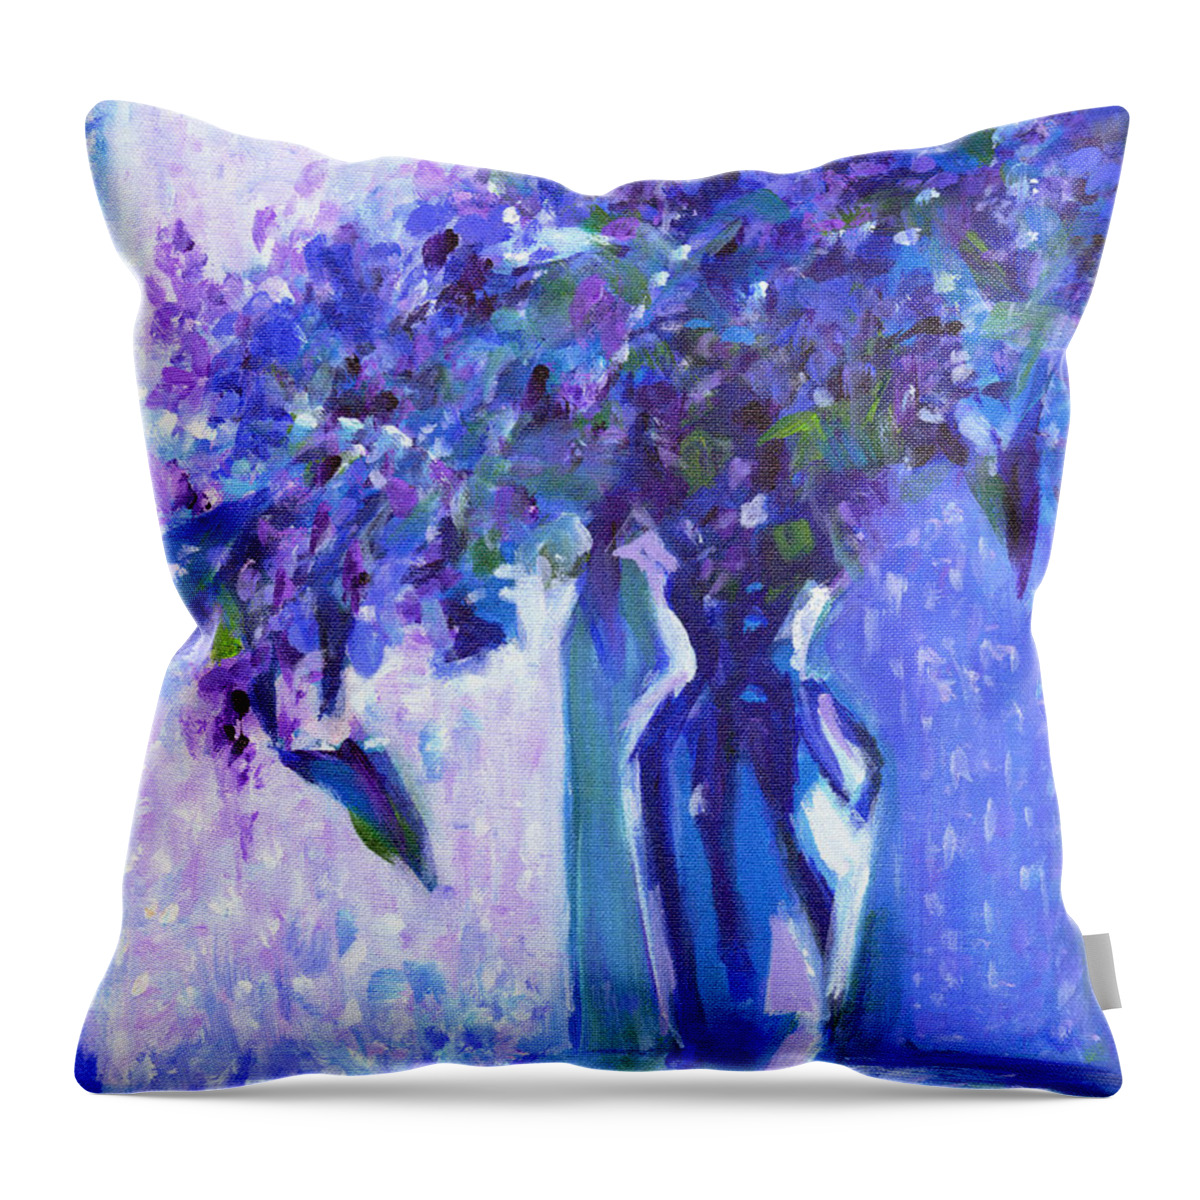 Acrylic Painting Throw Pillow featuring the painting Lilac Rain by Tanya Filichkin